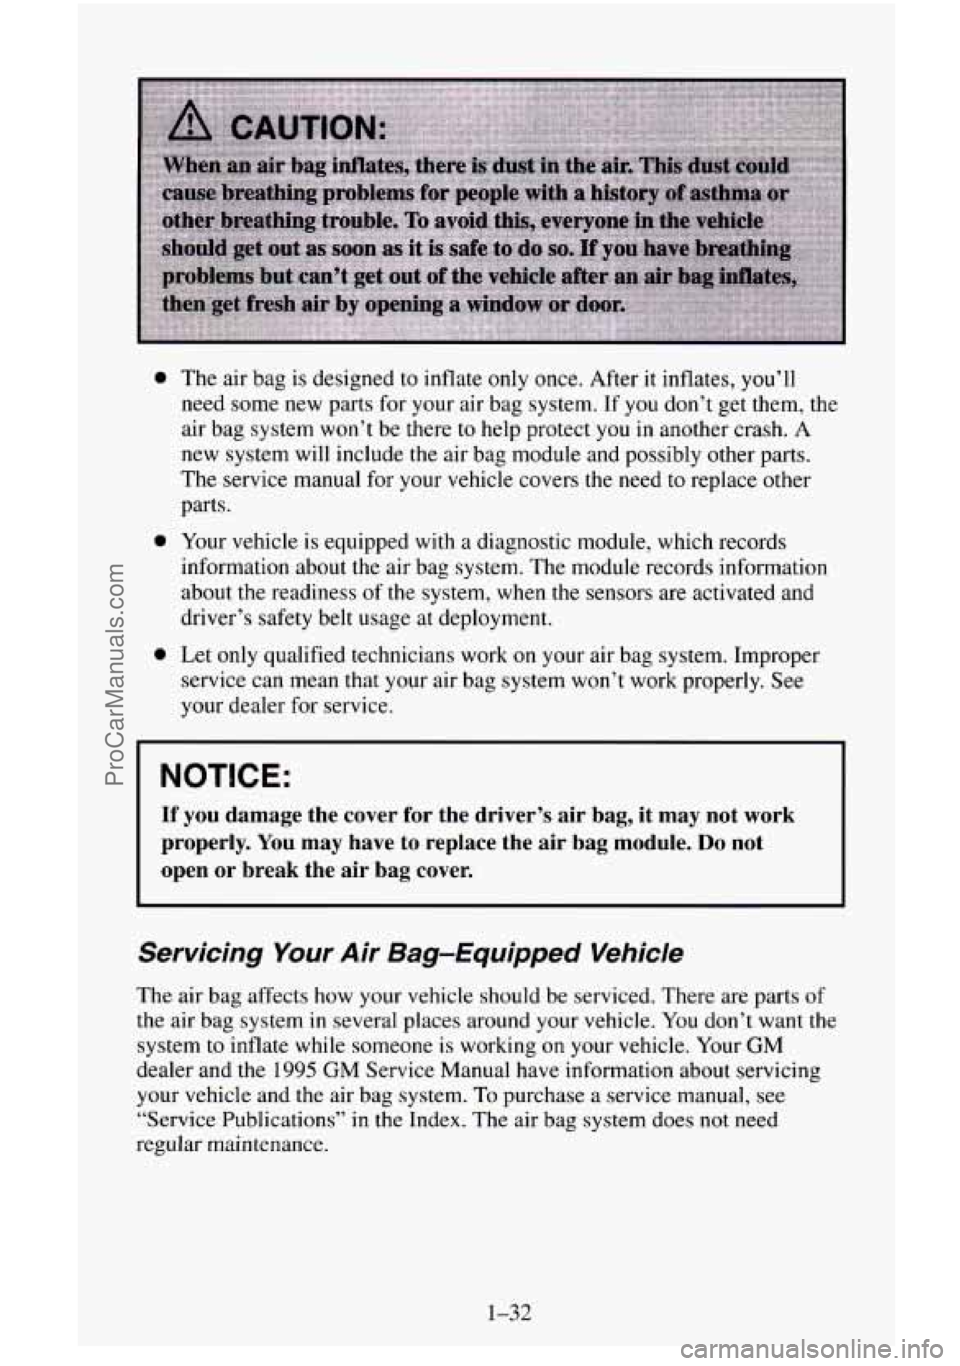 CHEVROLET SUBURBAN 1996 Service Manual 0 
0 
0 
The  air  bag is designed to inflate only once.  After it inflates, you’ll 
need some new parts  for your  air bag  system.  If you  don’t  get them, the 
air  bag system  won’t  be the